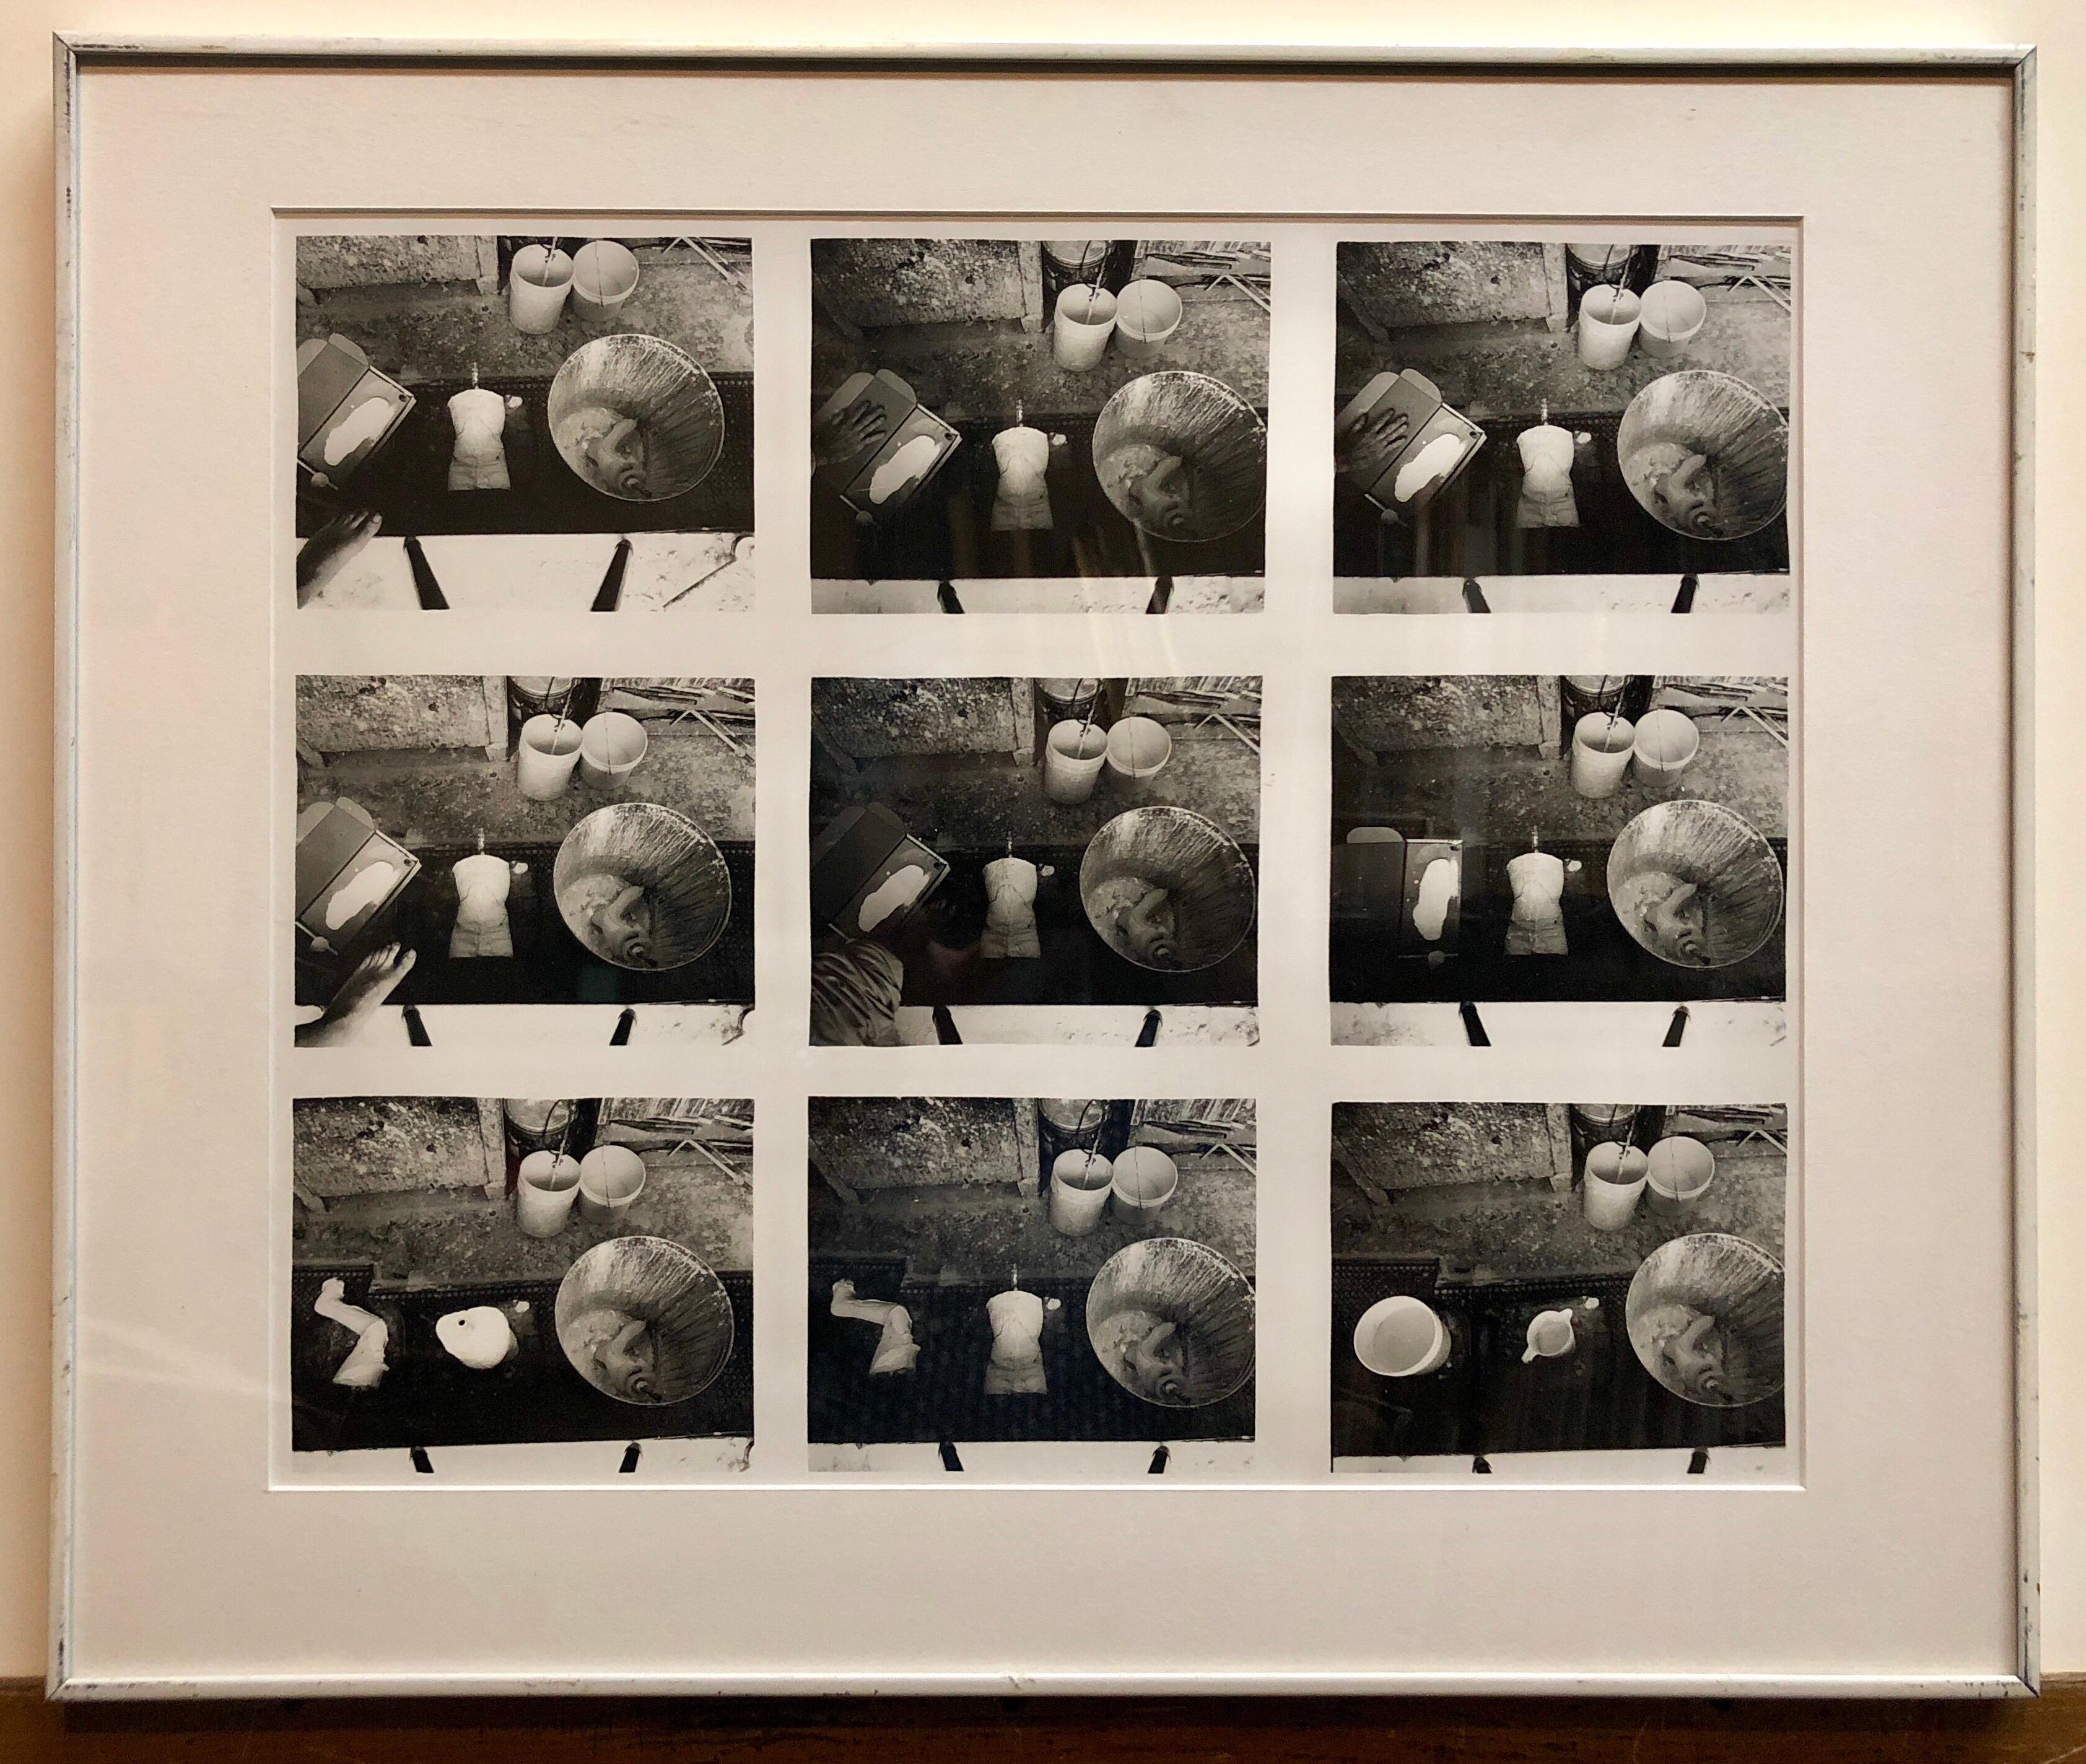 These are vintage prints from the 1980's. The last photo shows of a label from an accompanying piece (there were three sequence shots in this series) but is not on this piece. They look like contact sheets or film strips. There is no signature on